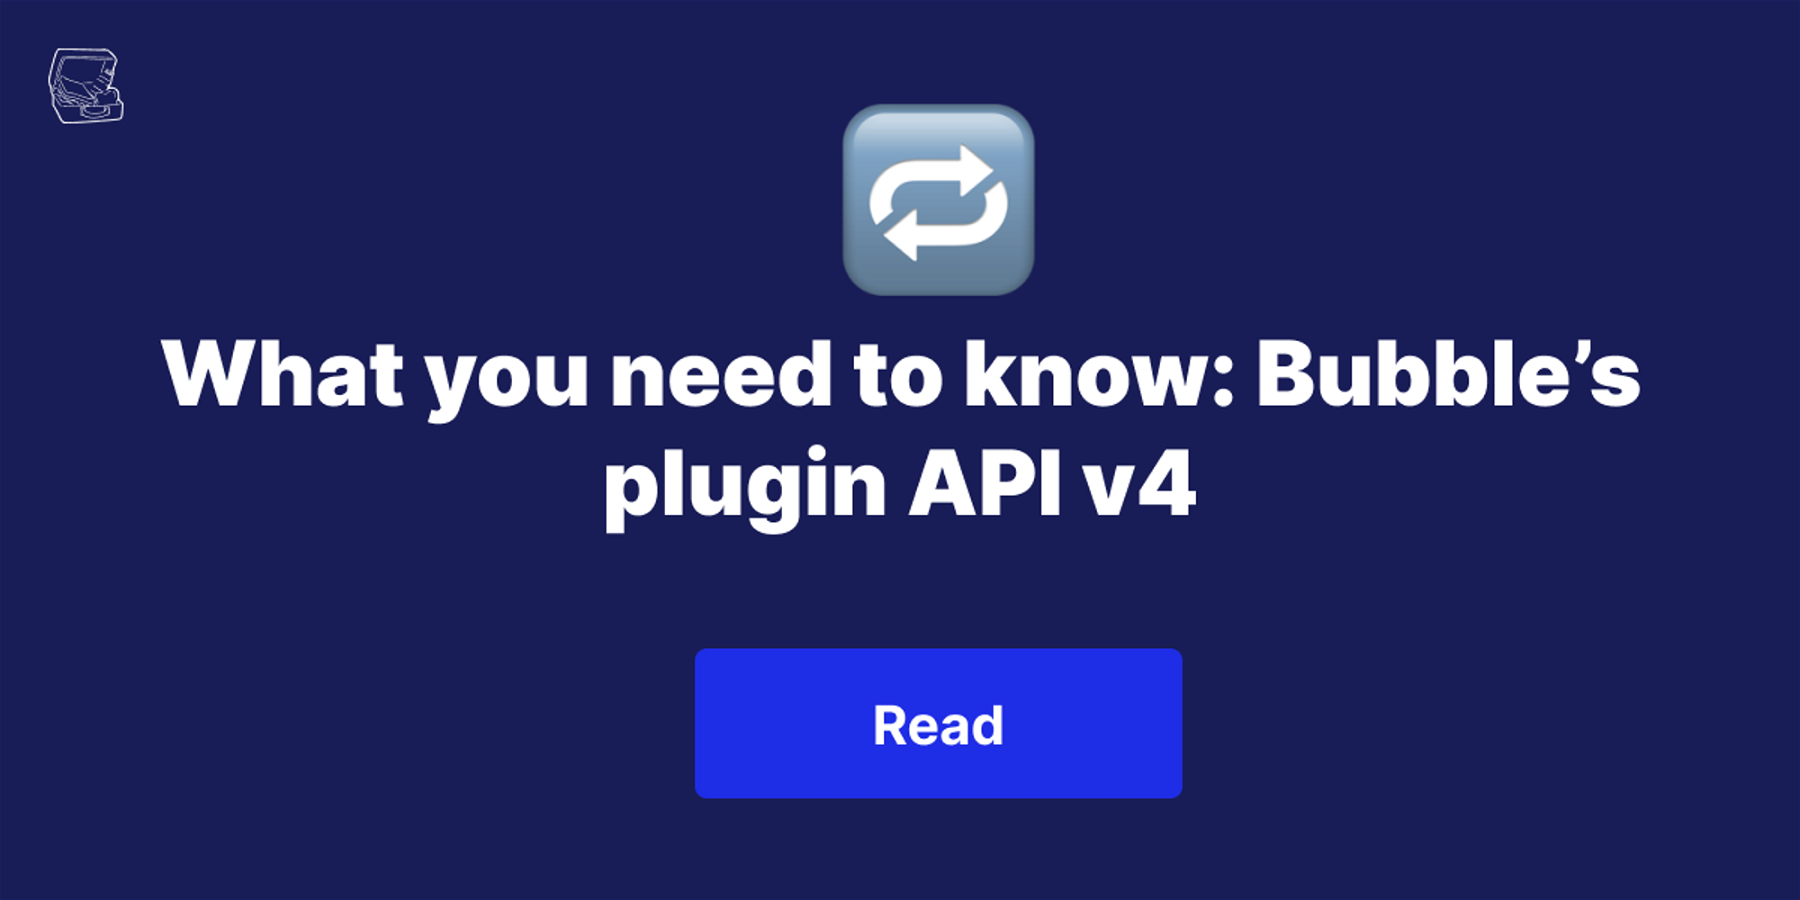 What you need to know: Bubble’s plugin API v4